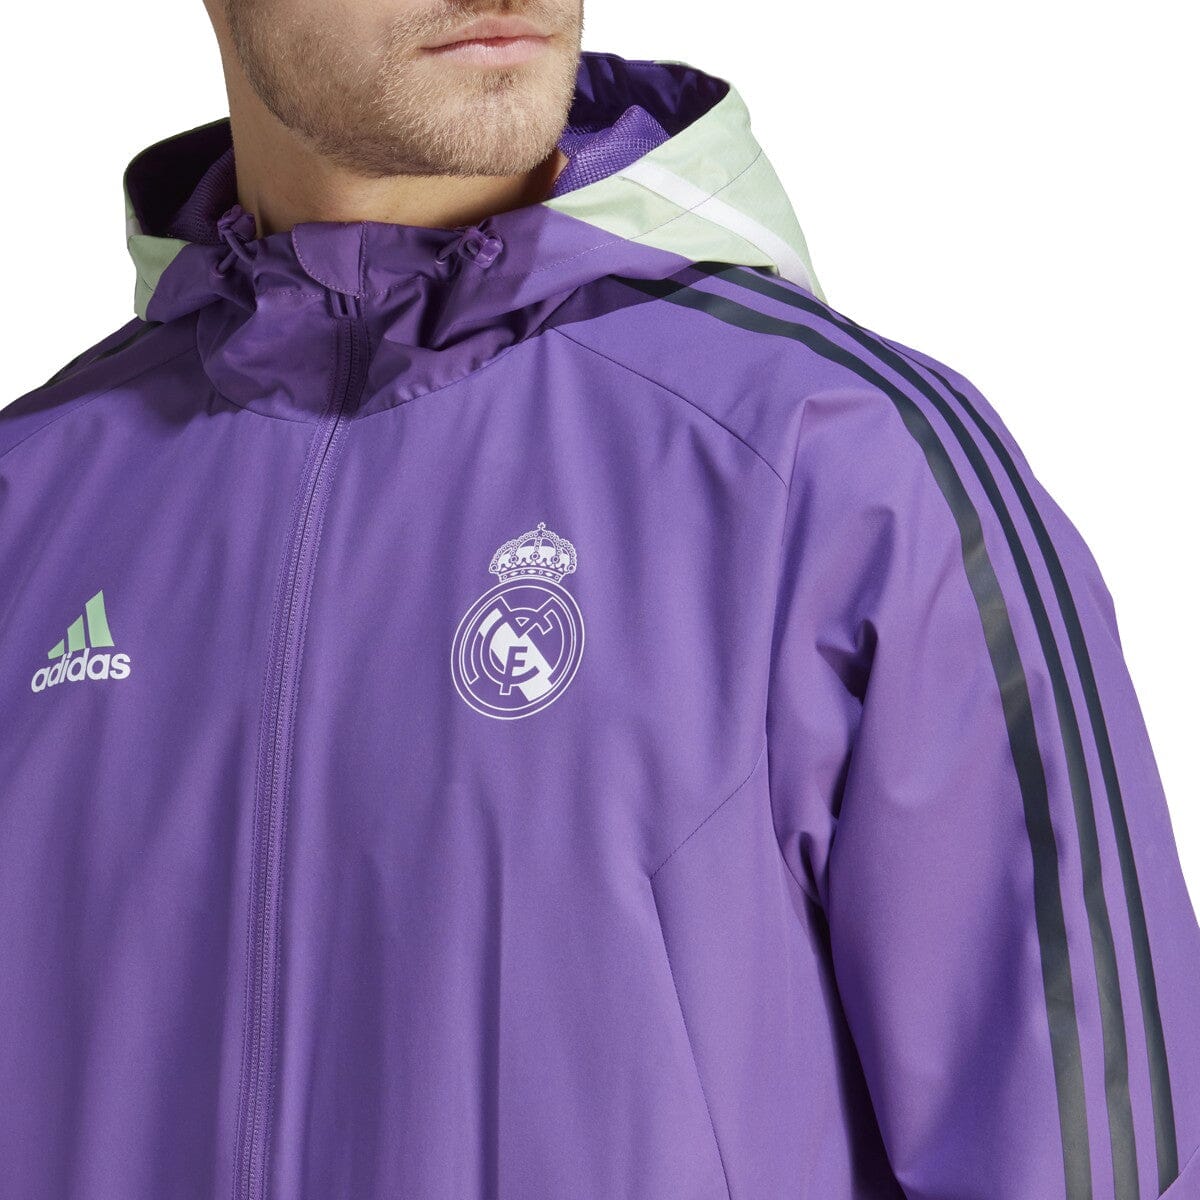 $80 Mens Size M Adidas Real Madrid All Over Print Woven Hoodie Jacket  H59047 2